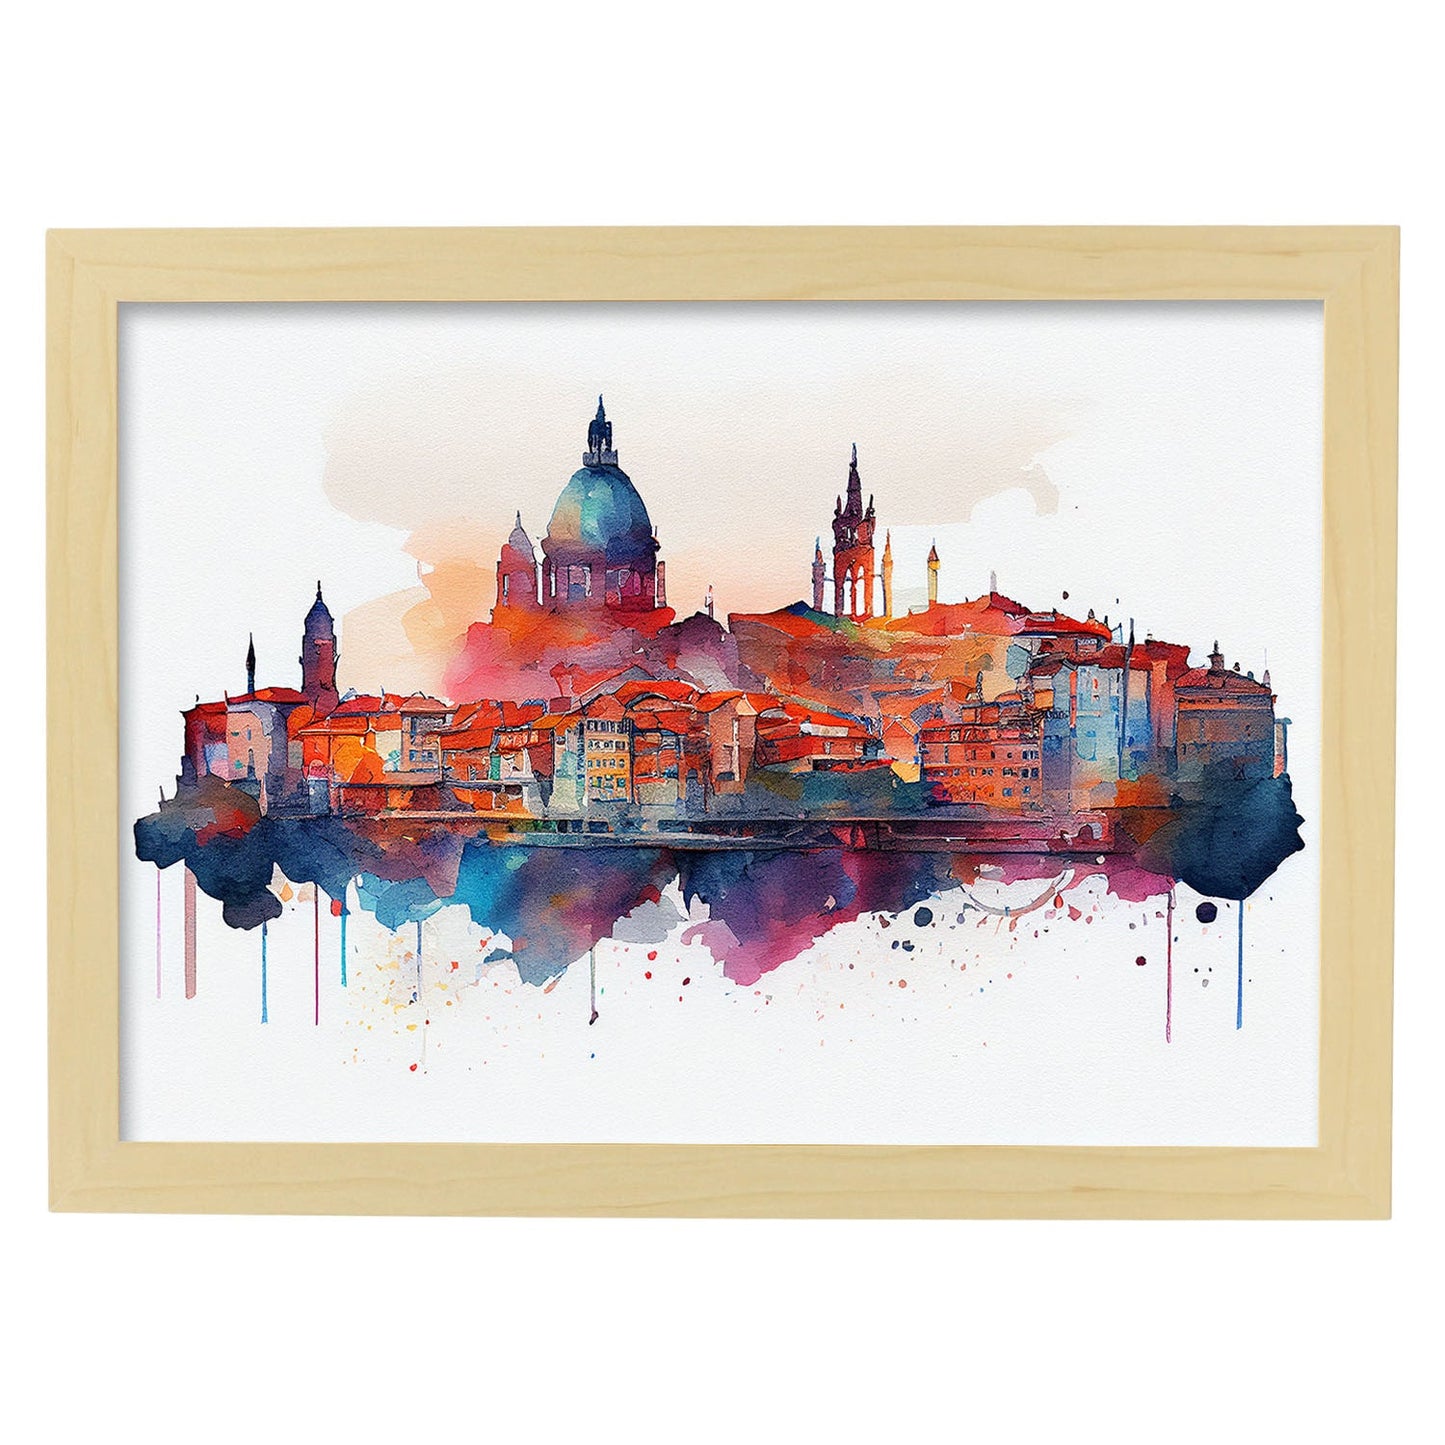 Nacnic watercolor of a skyline of the city of Porto. Aesthetic Wall Art Prints for Bedroom or Living Room Design.-Artwork-Nacnic-A4-Marco Madera Clara-Nacnic Estudio SL